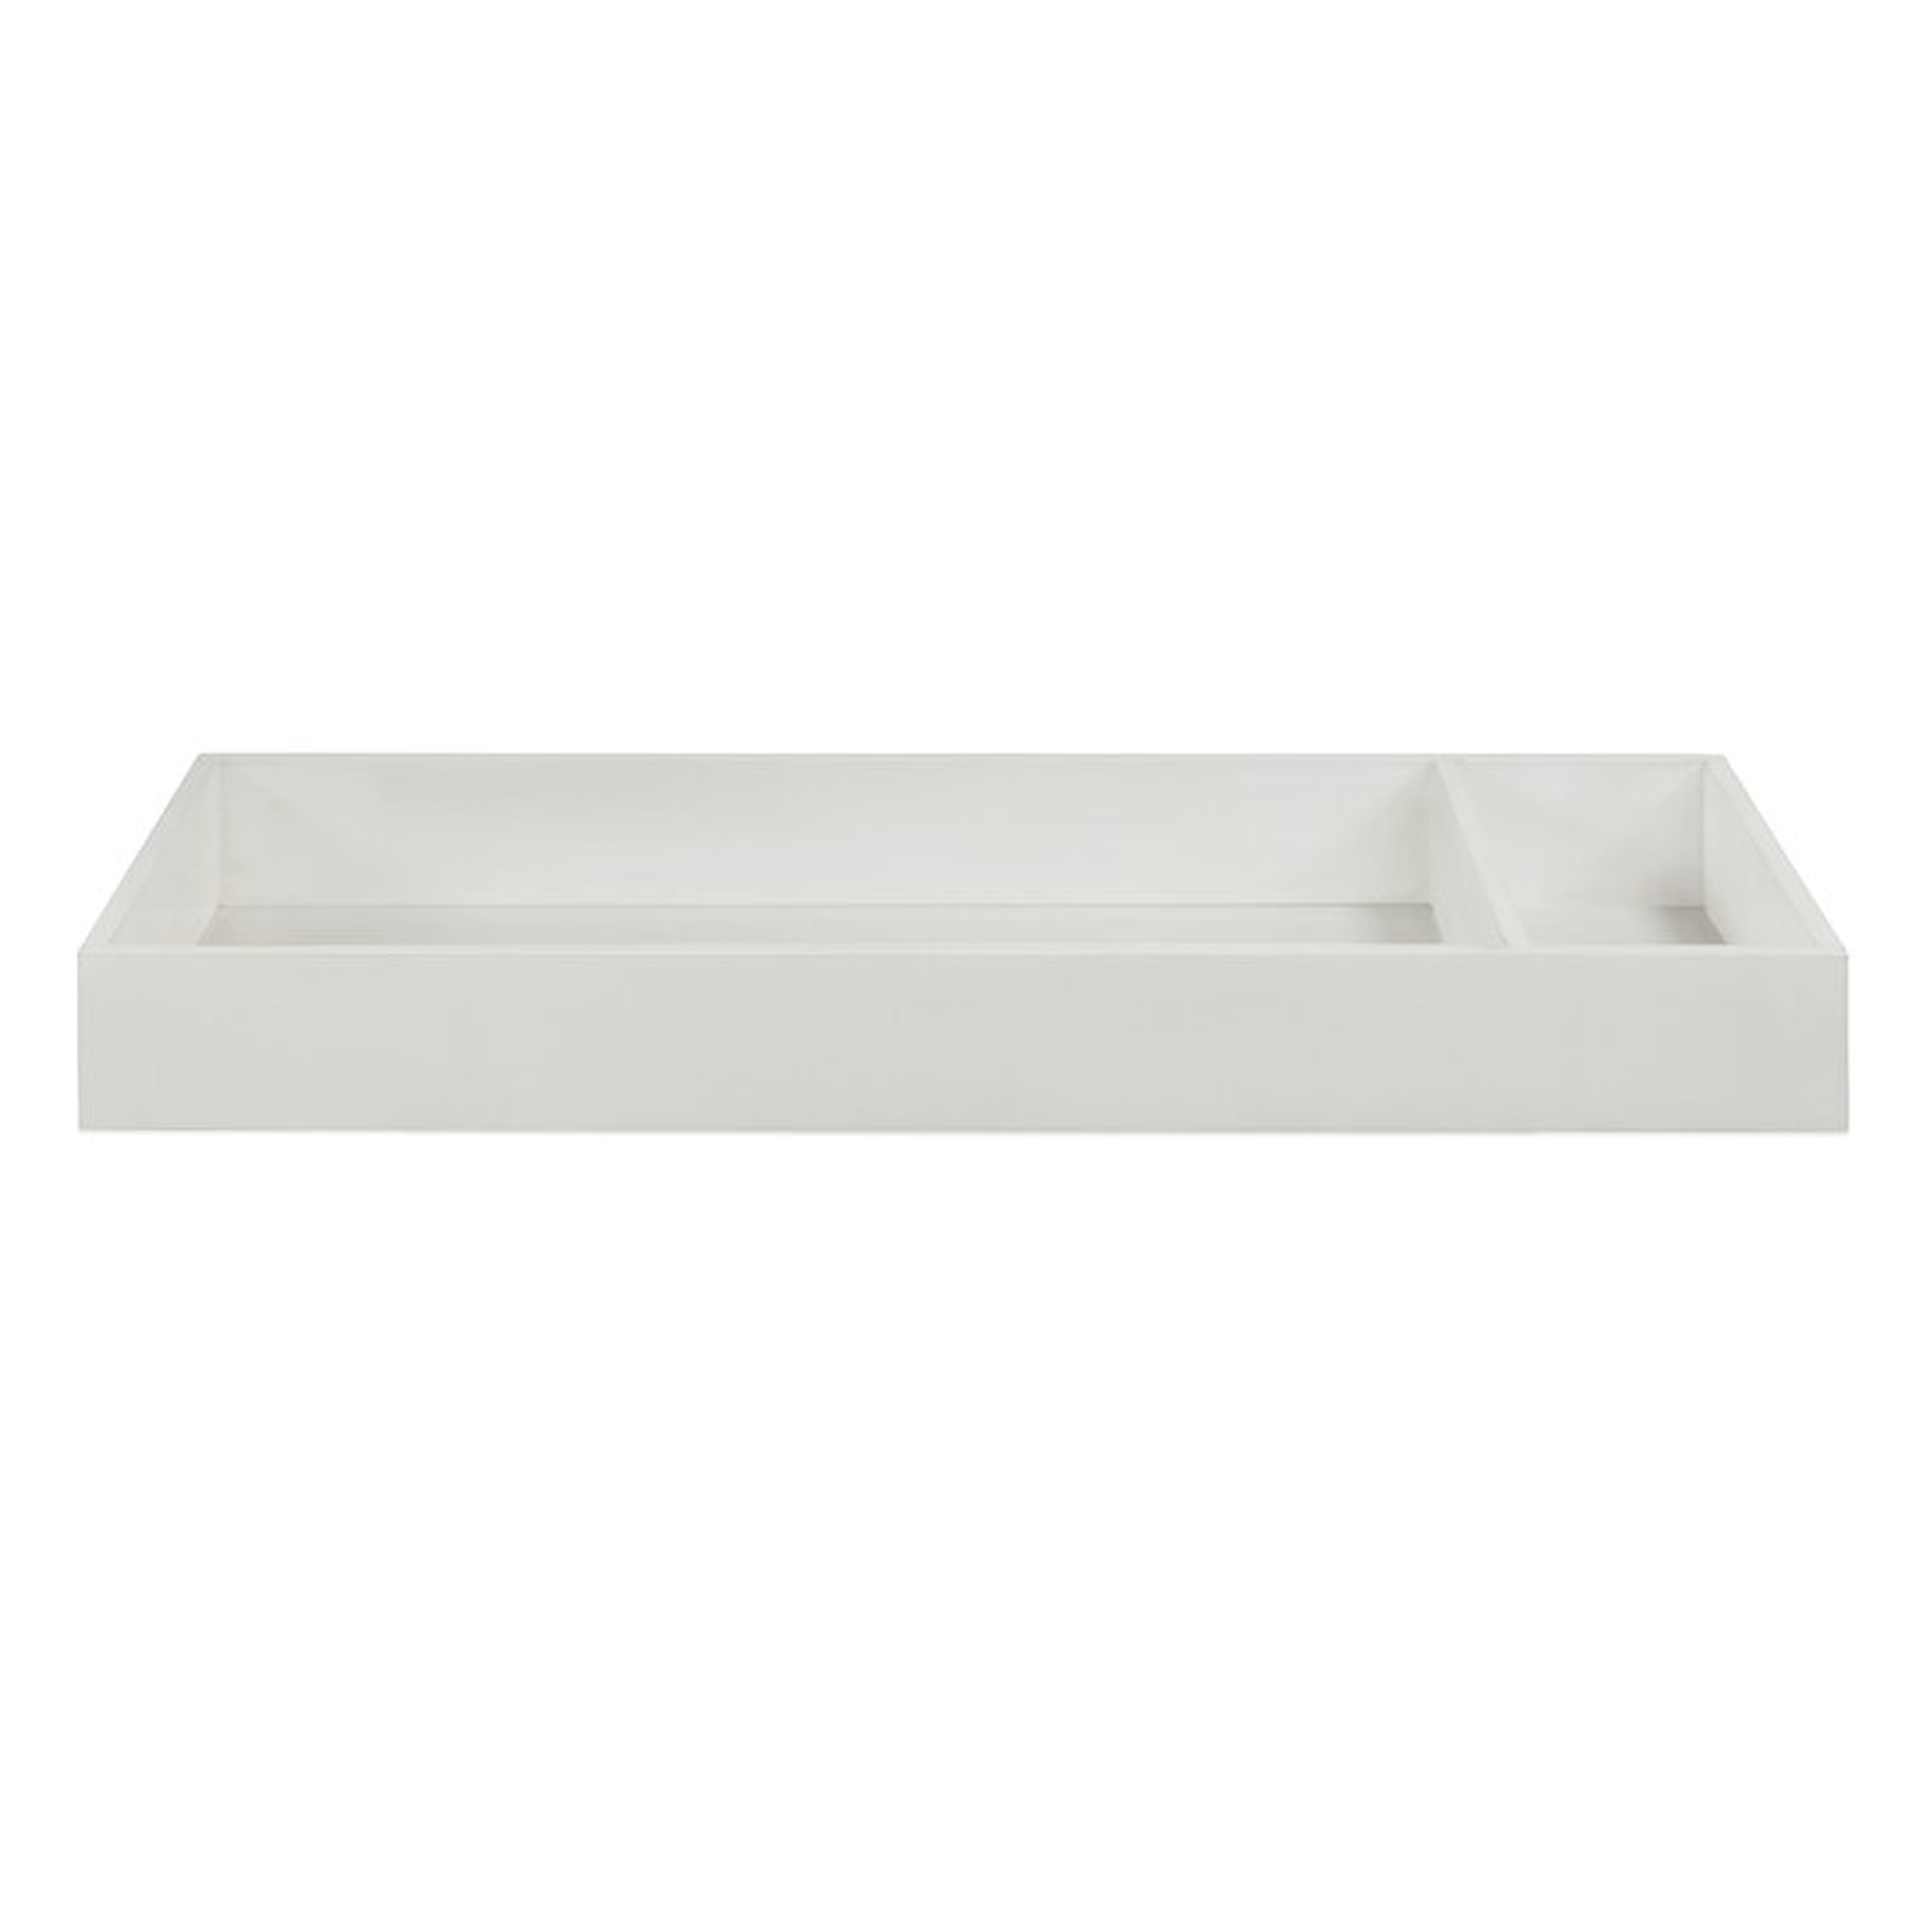 Notting Hill Changing Table Topper - Wayfair